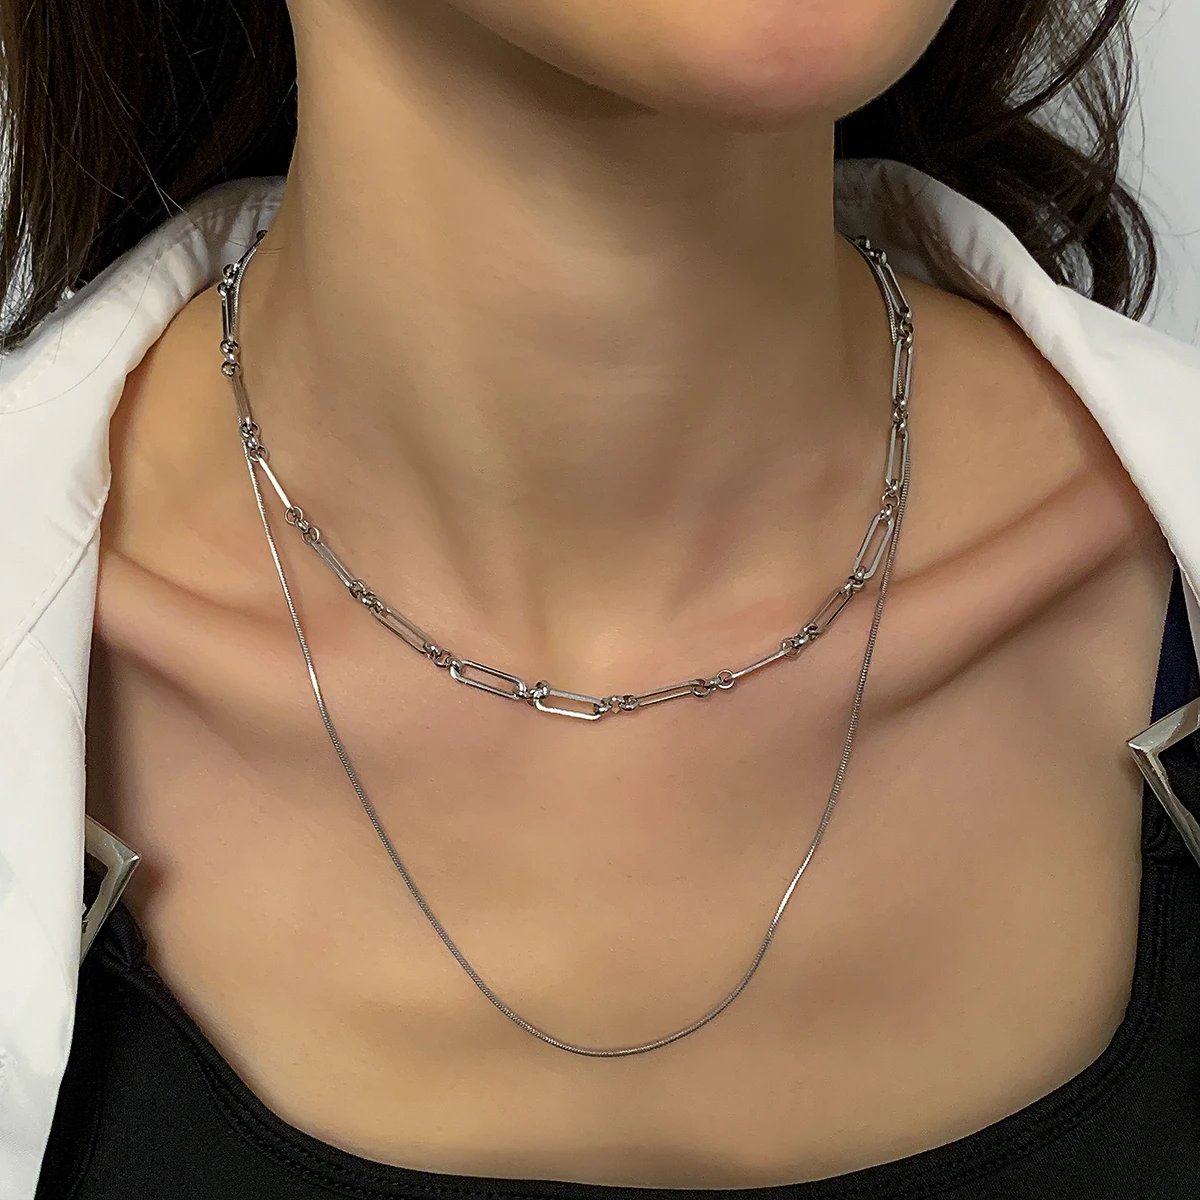 

Lacteo Simple Stainless Steel Double Layers Chain Necklace Chokers Women Minimalist Punk Jewelry On The Neck Collar Party Girls